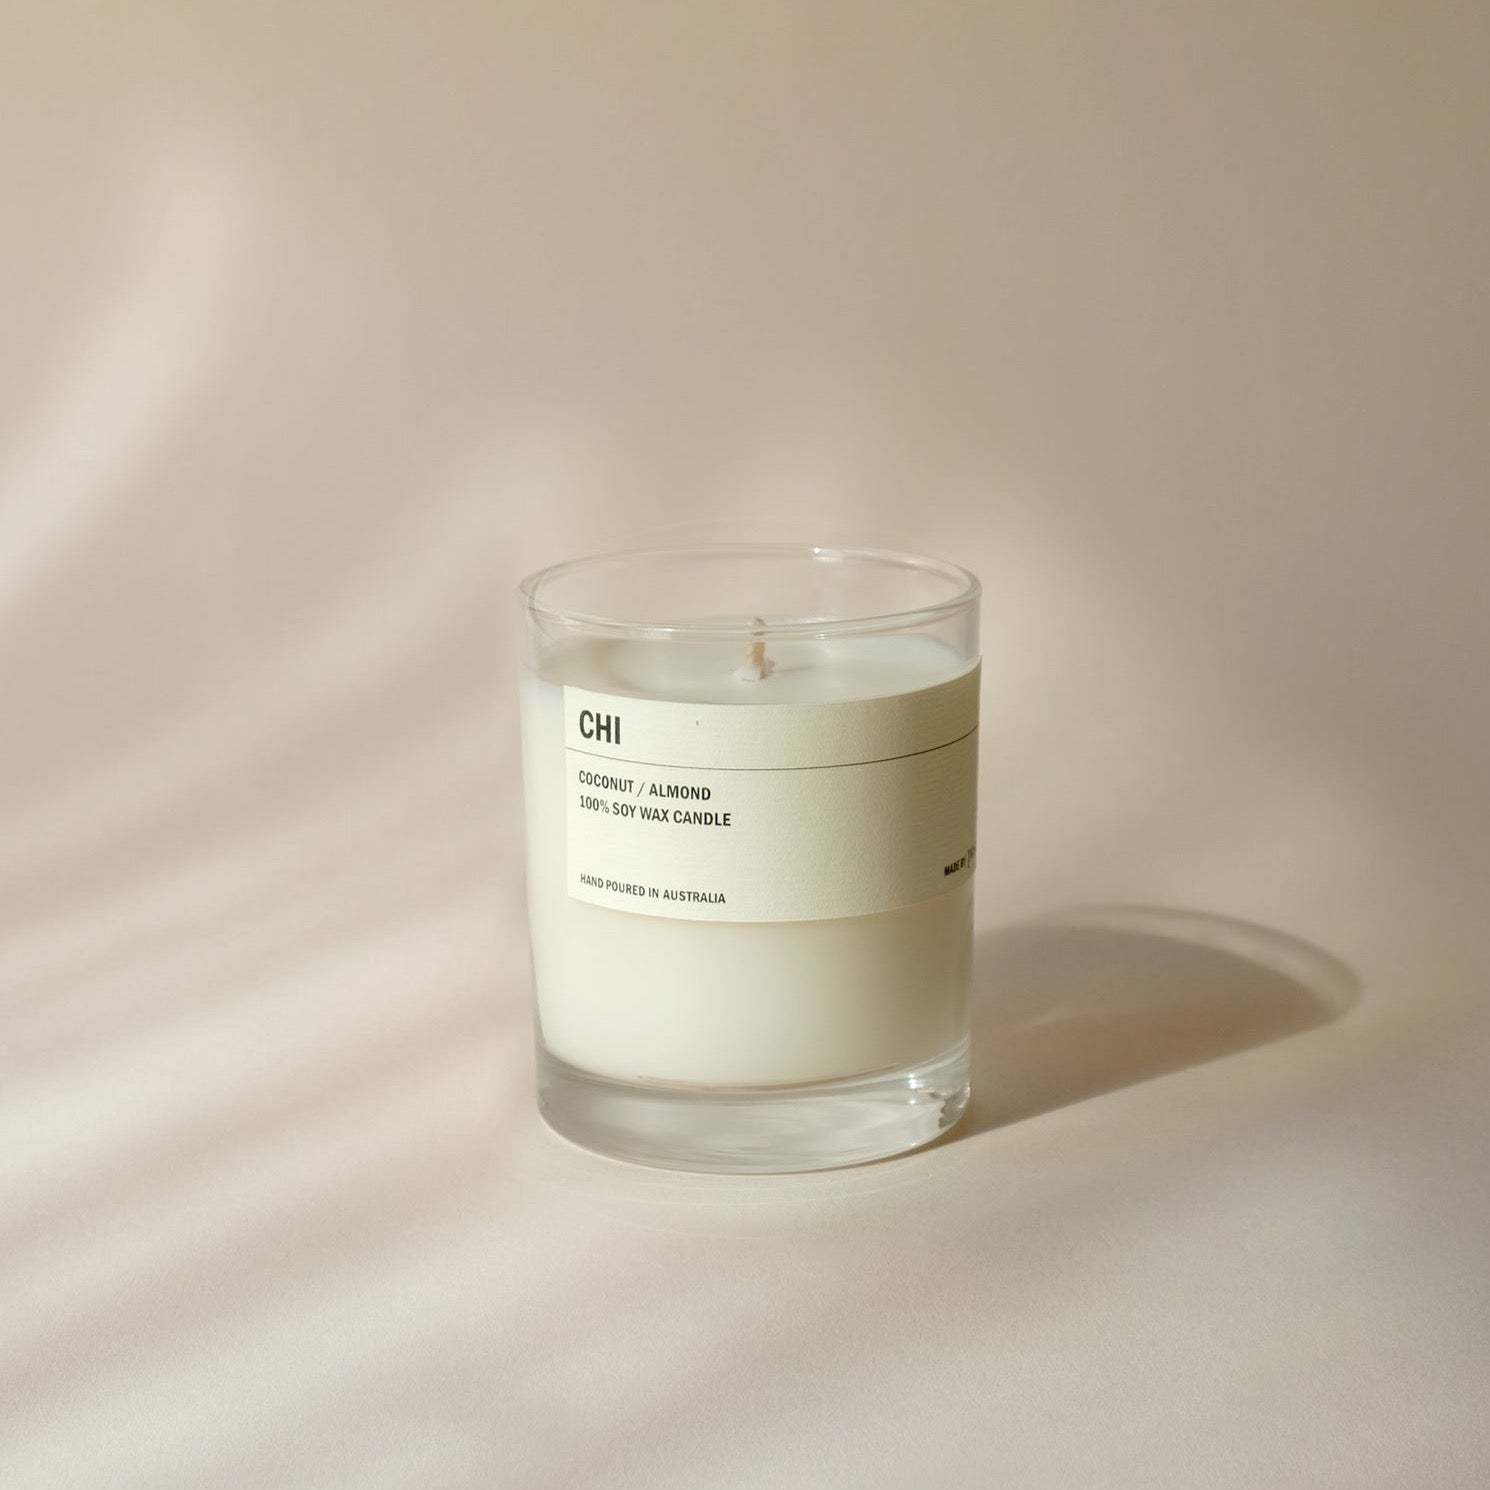 CHI: Coconut / Almond Clear Candle 300g